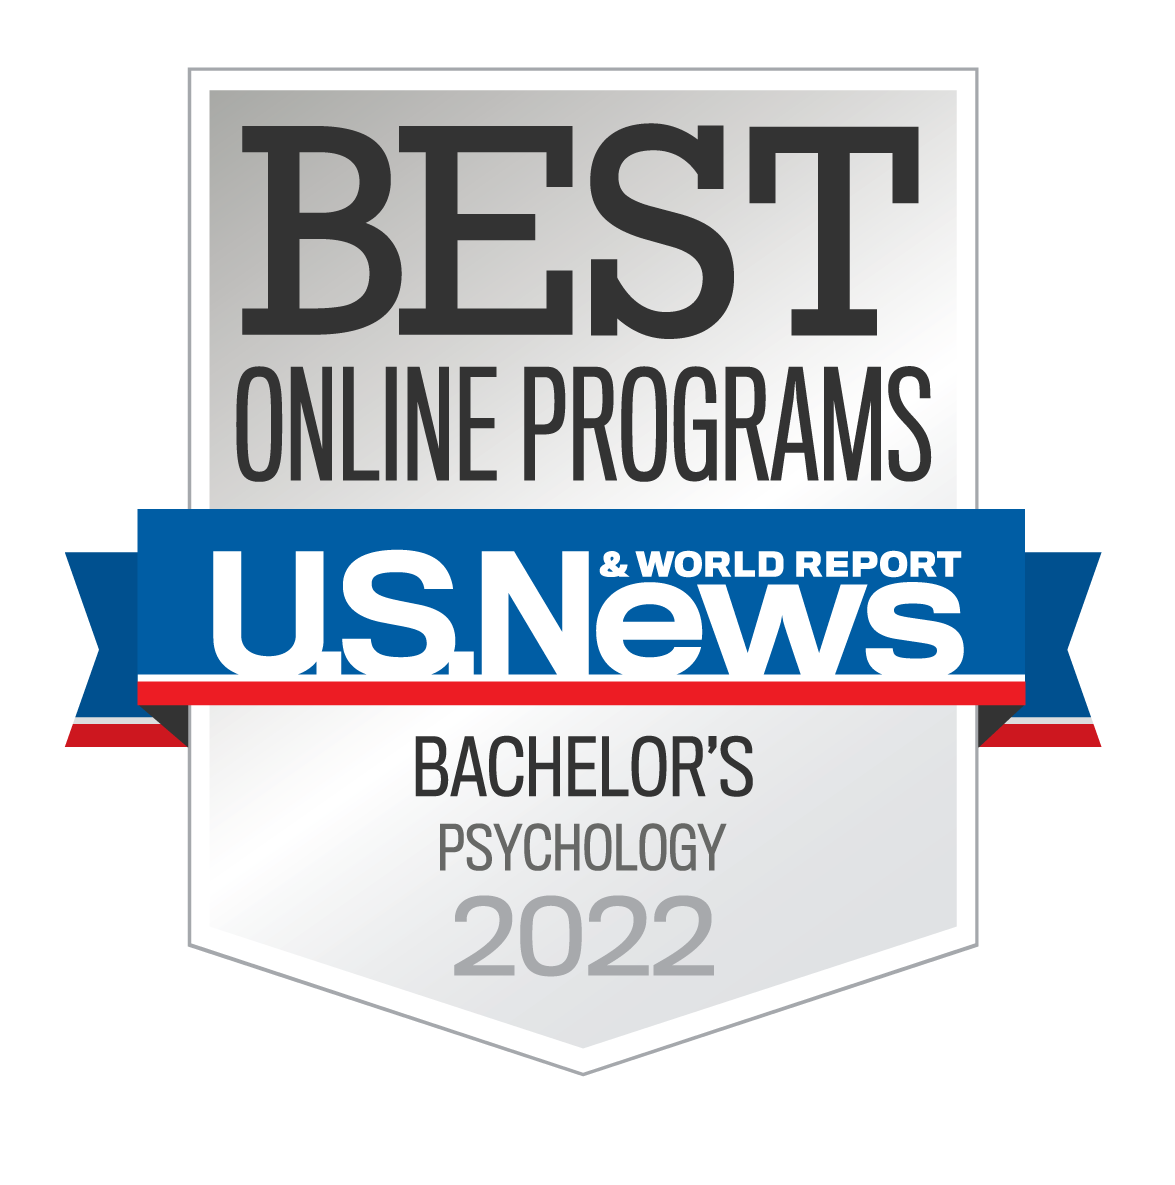 U.S. New and world reports. Best Online Programs: Bachelor's of Psychology 2022